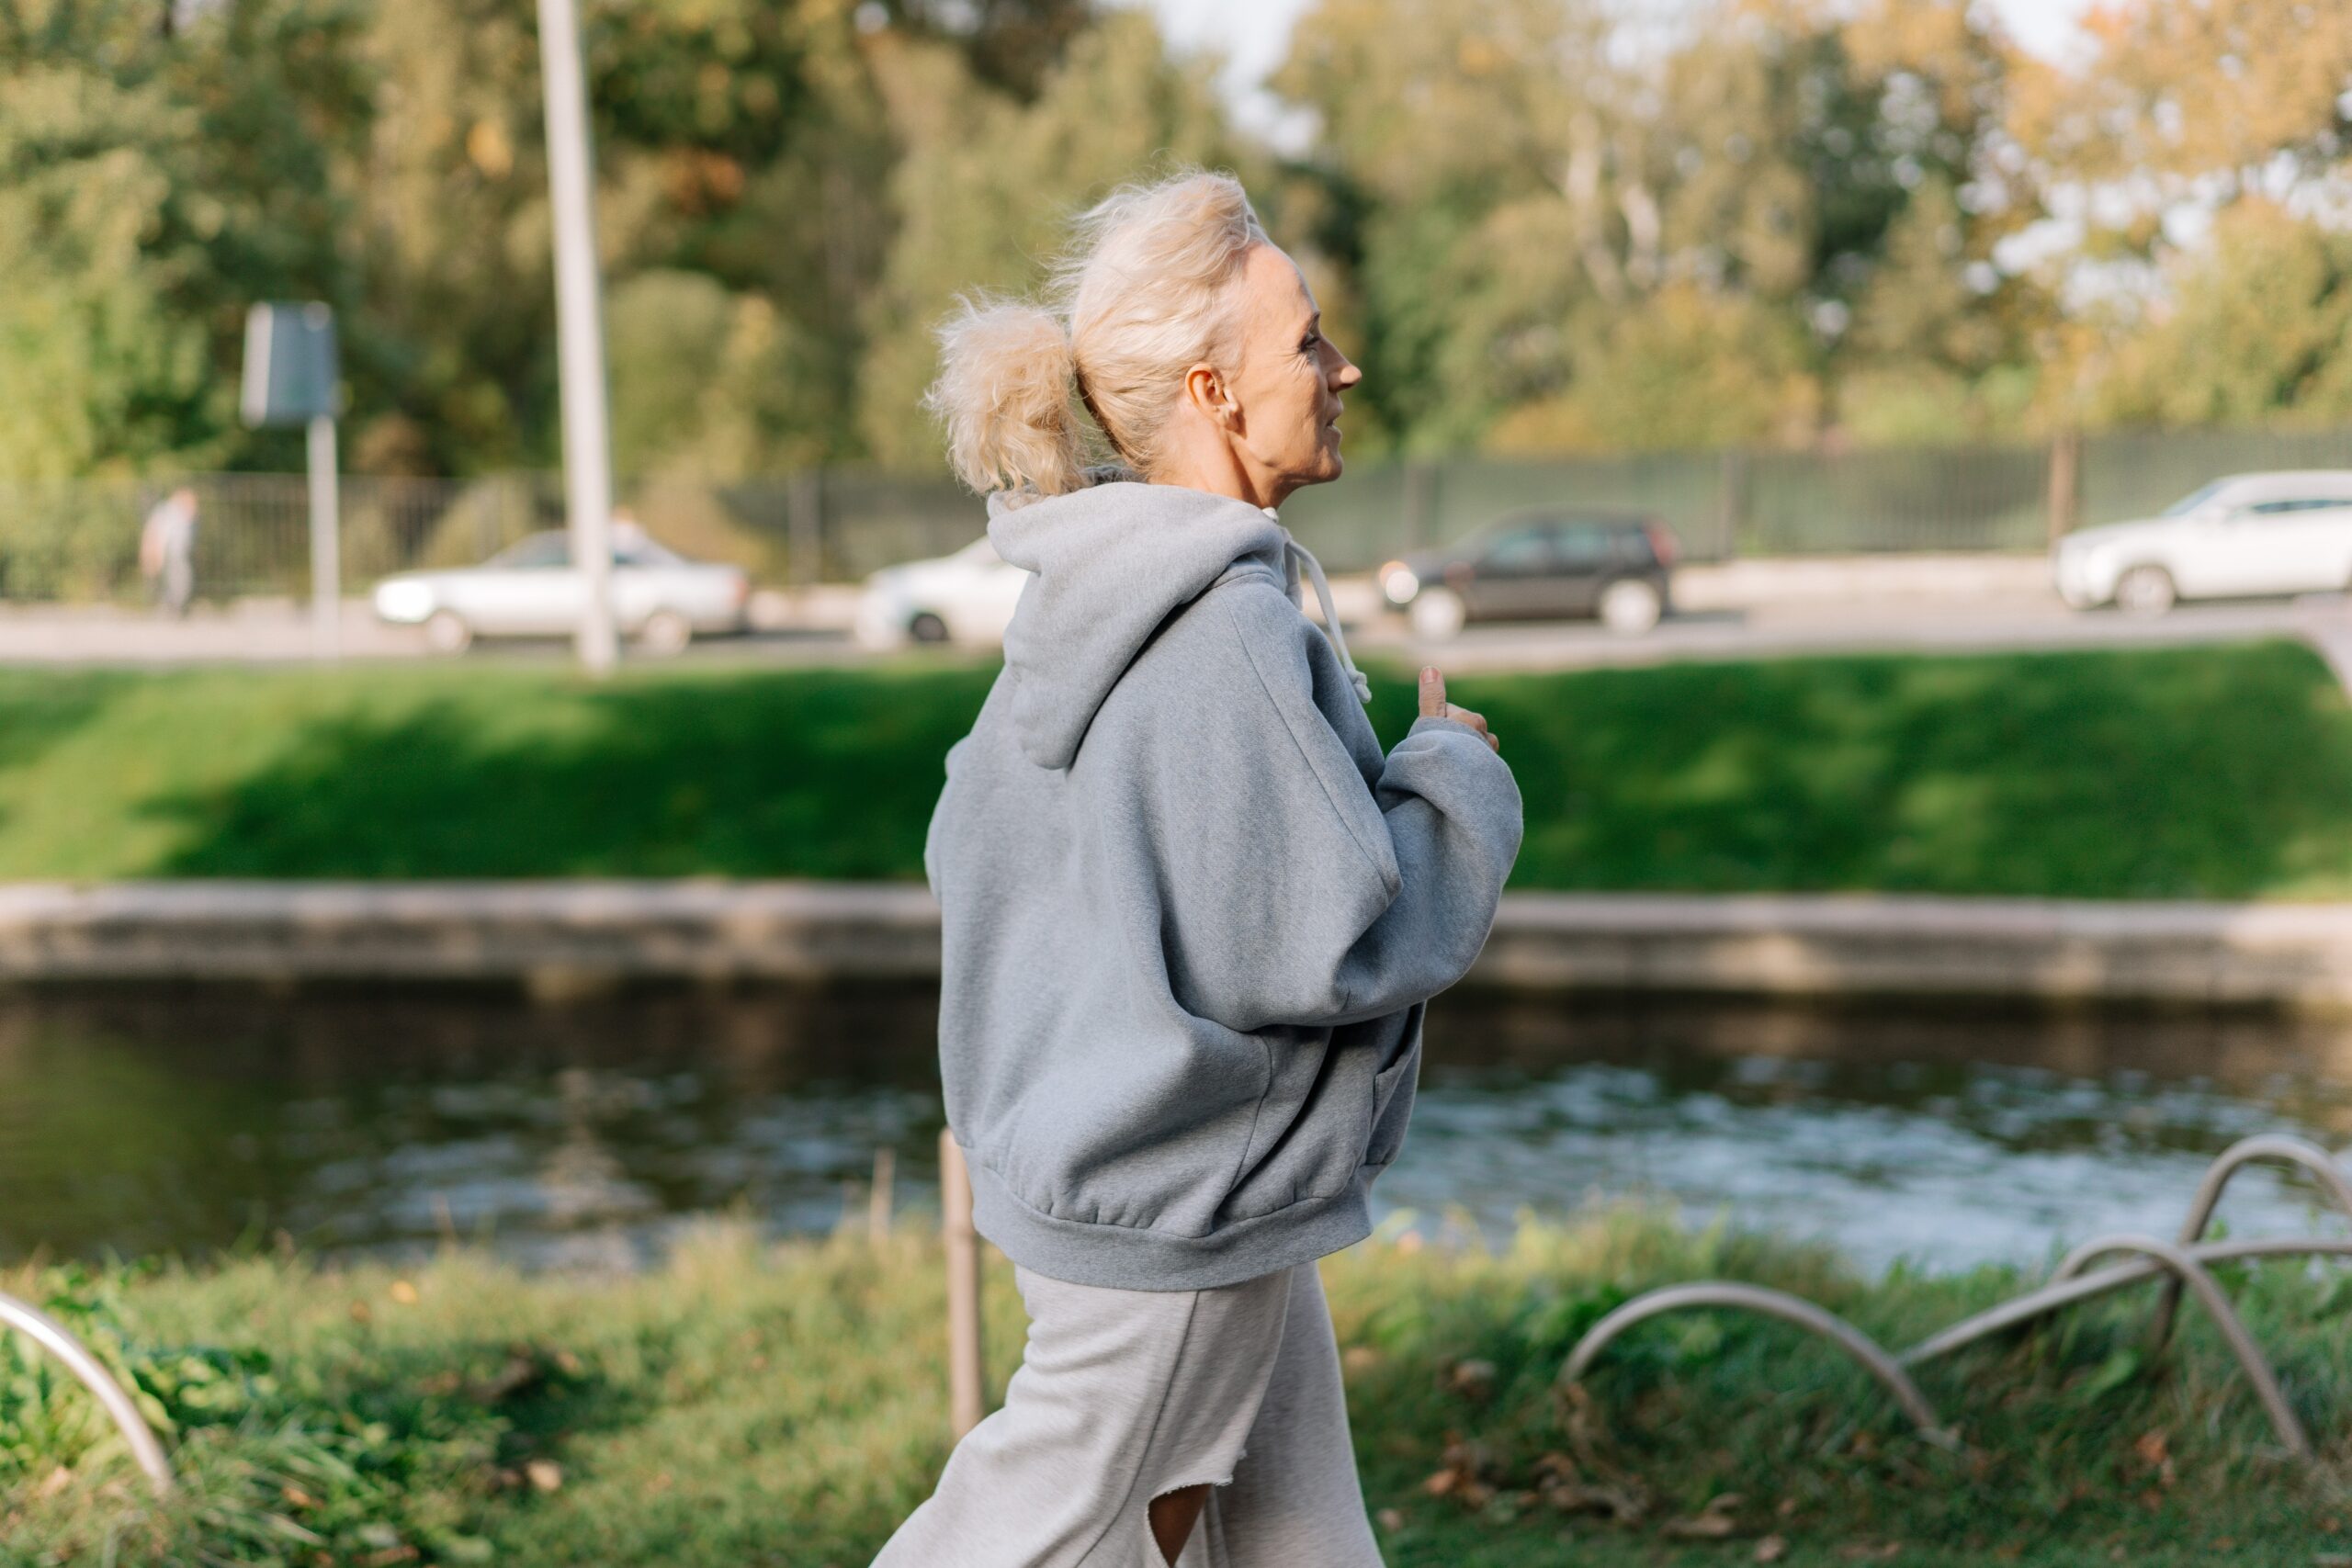 Easy Ways for those 55+ to Stay Physically Active in 2023 and Beyond